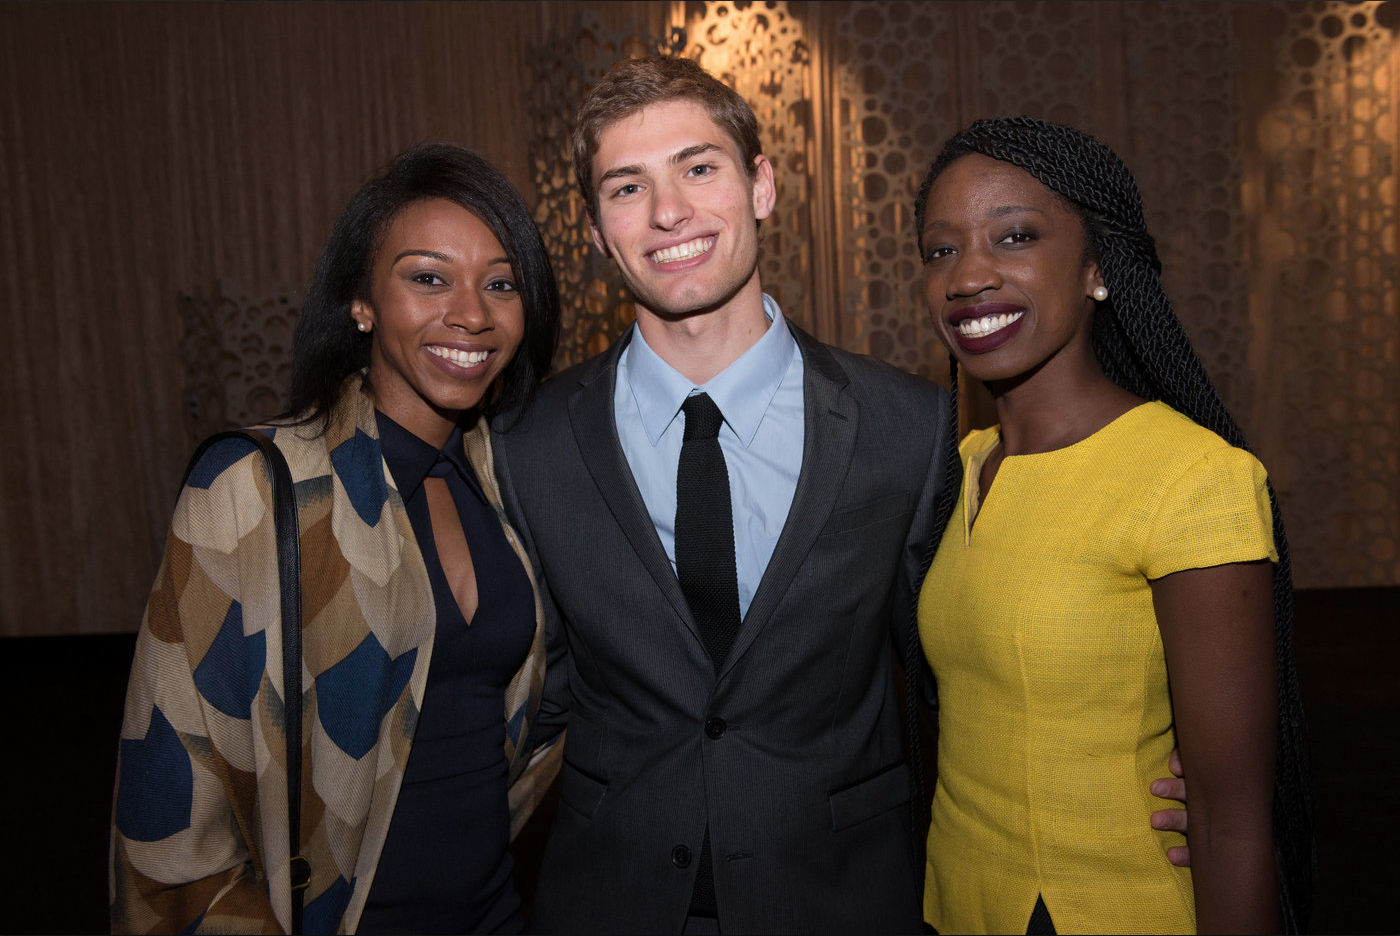 Current students Demetria Clark and Moshe Pasternak and alumna Sally Nuamah, B.A. '11, spoke at the Power & Promise Dinner.